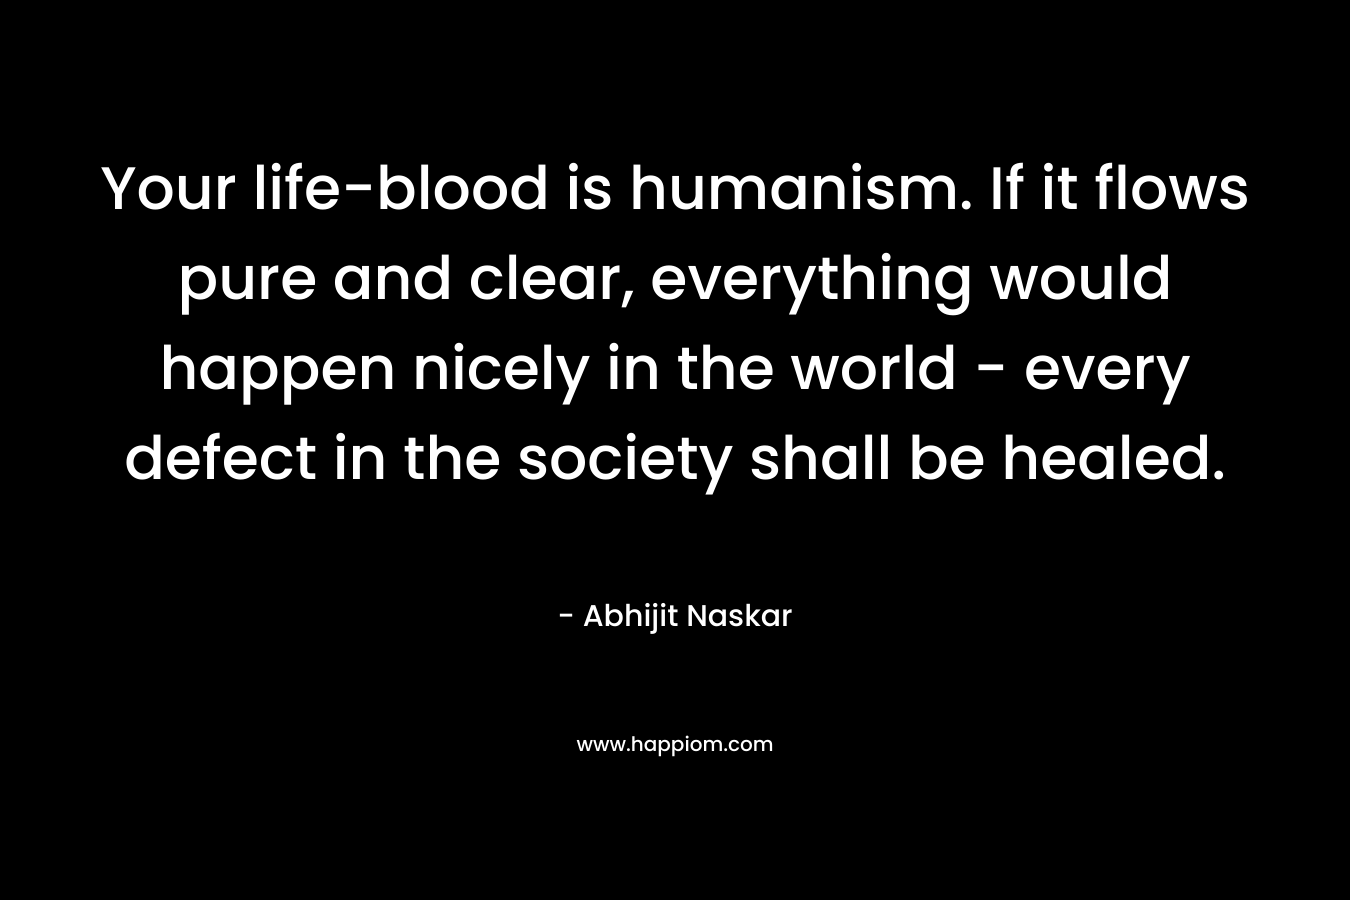 Your life-blood is humanism. If it flows pure and clear, everything would happen nicely in the world – every defect in the society shall be healed. – Abhijit Naskar